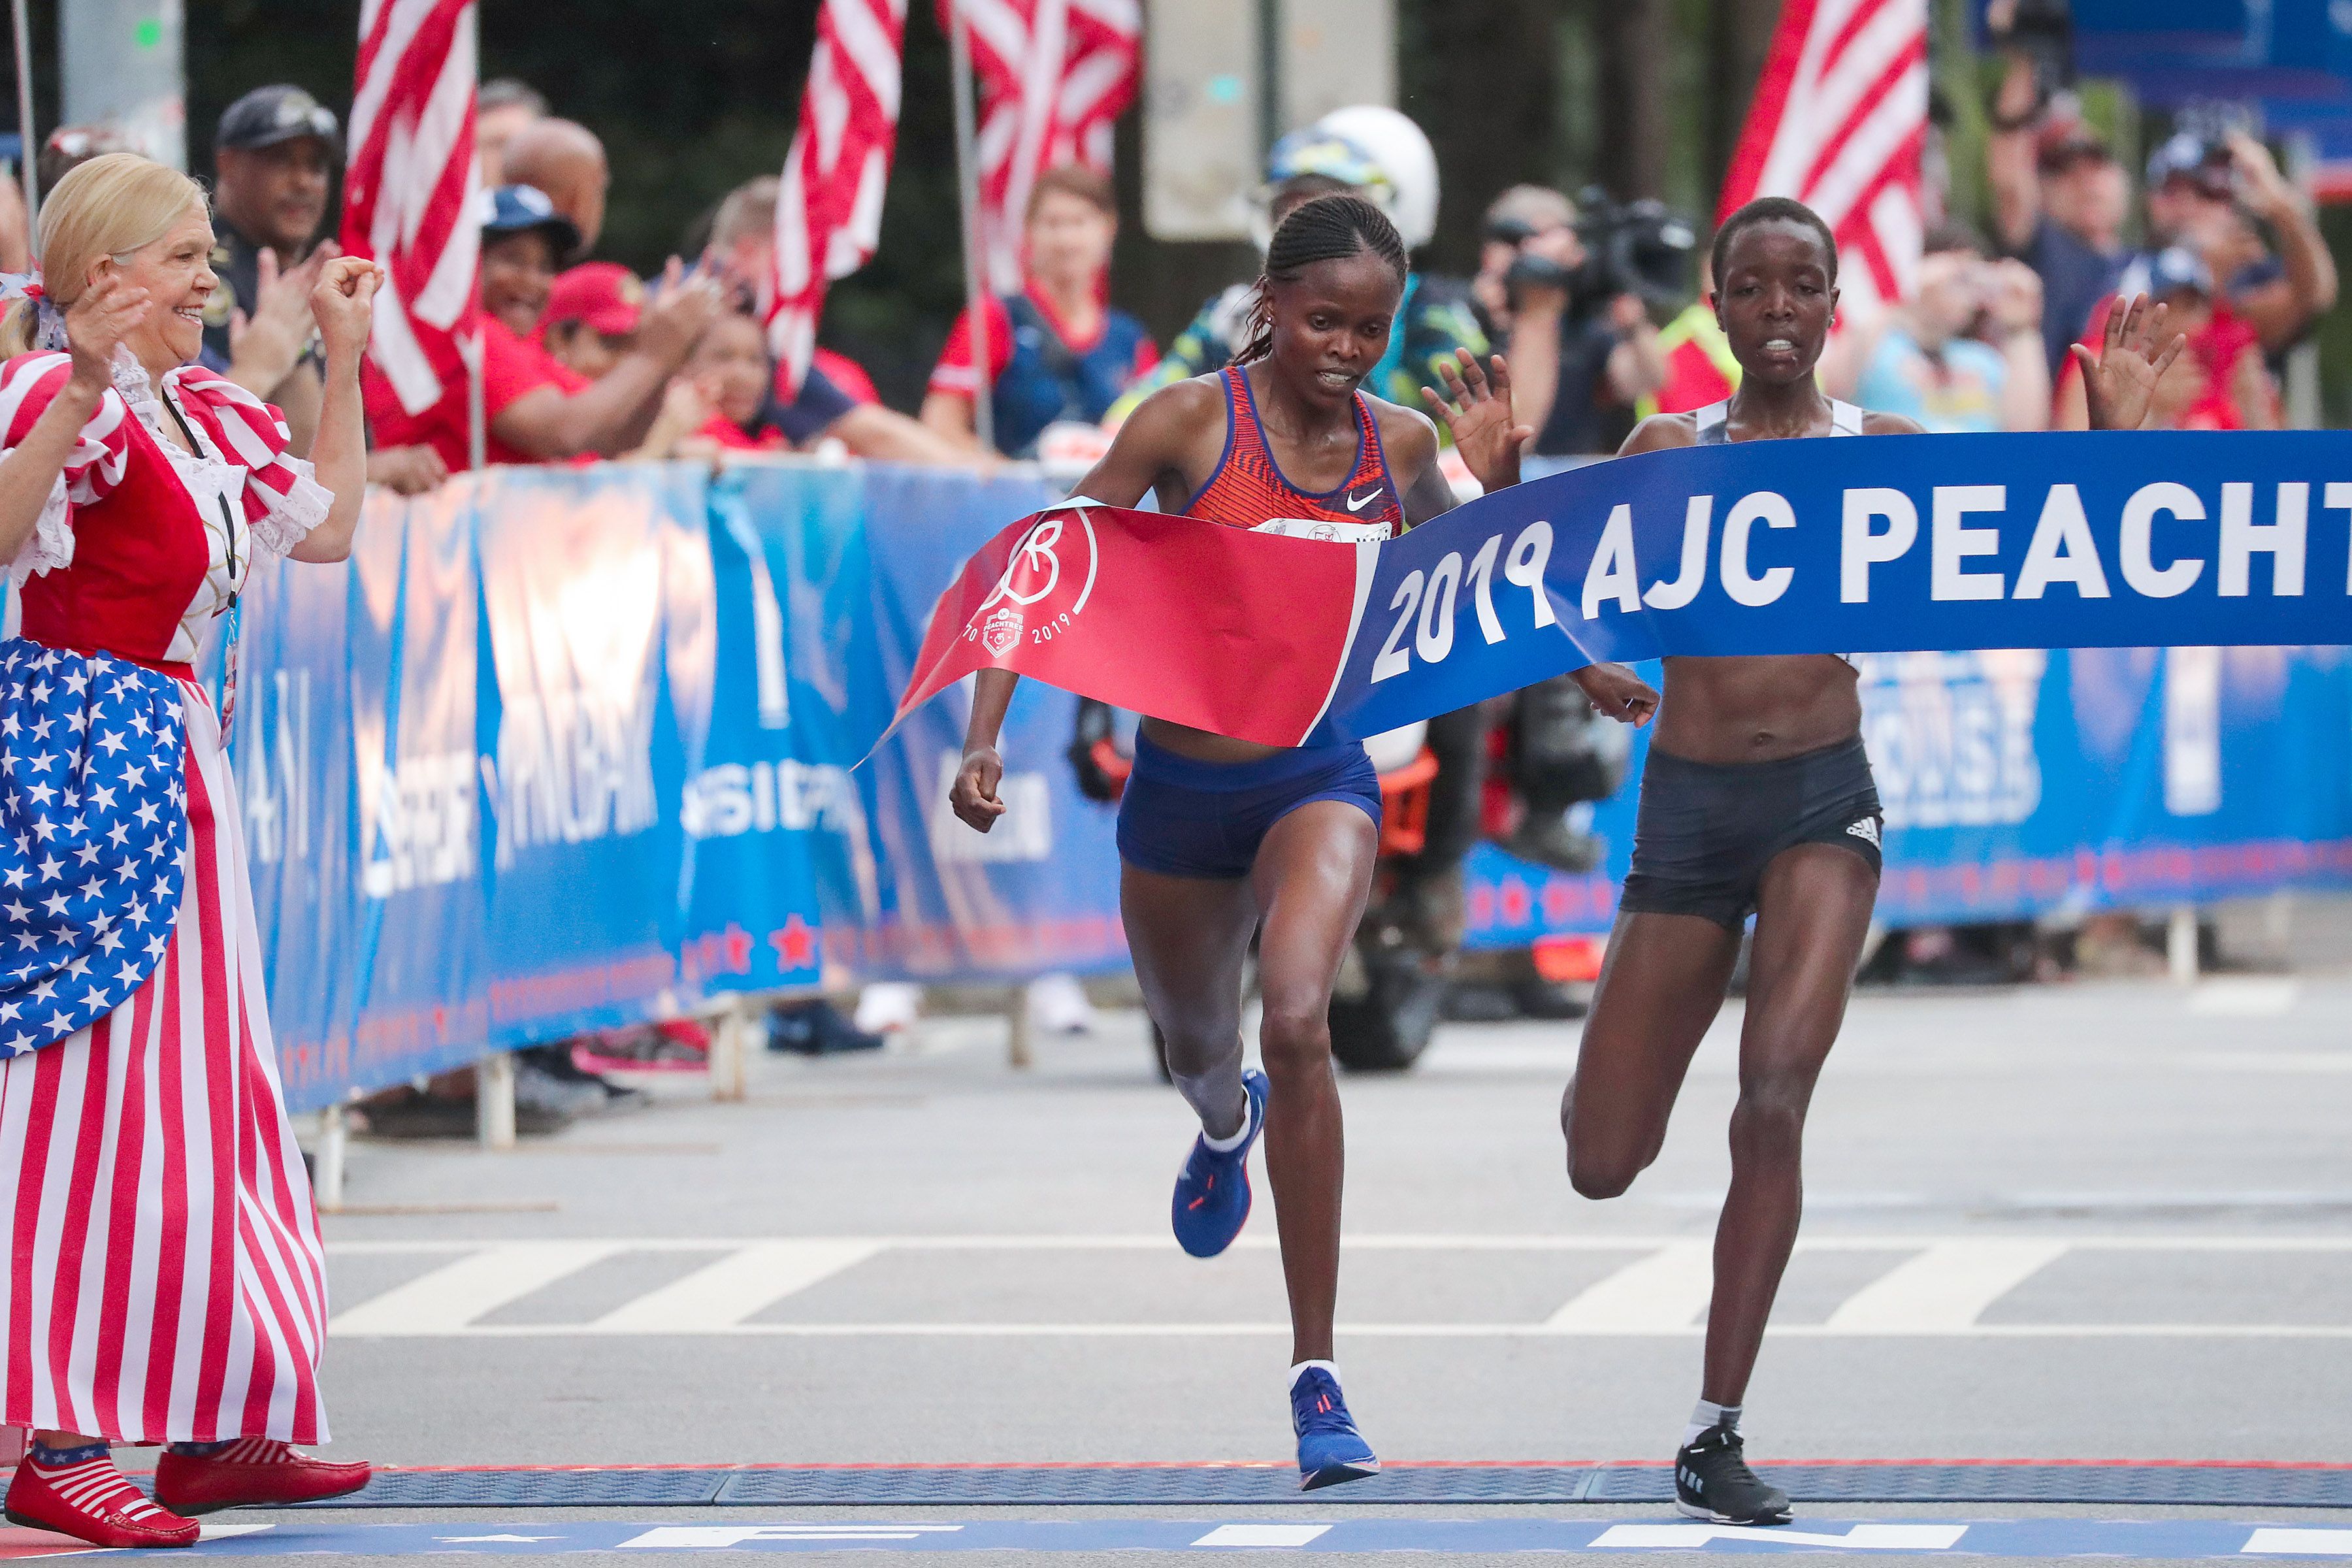 Event Records Fall as AJC Peachtree Road Race Celebrates 50th Running